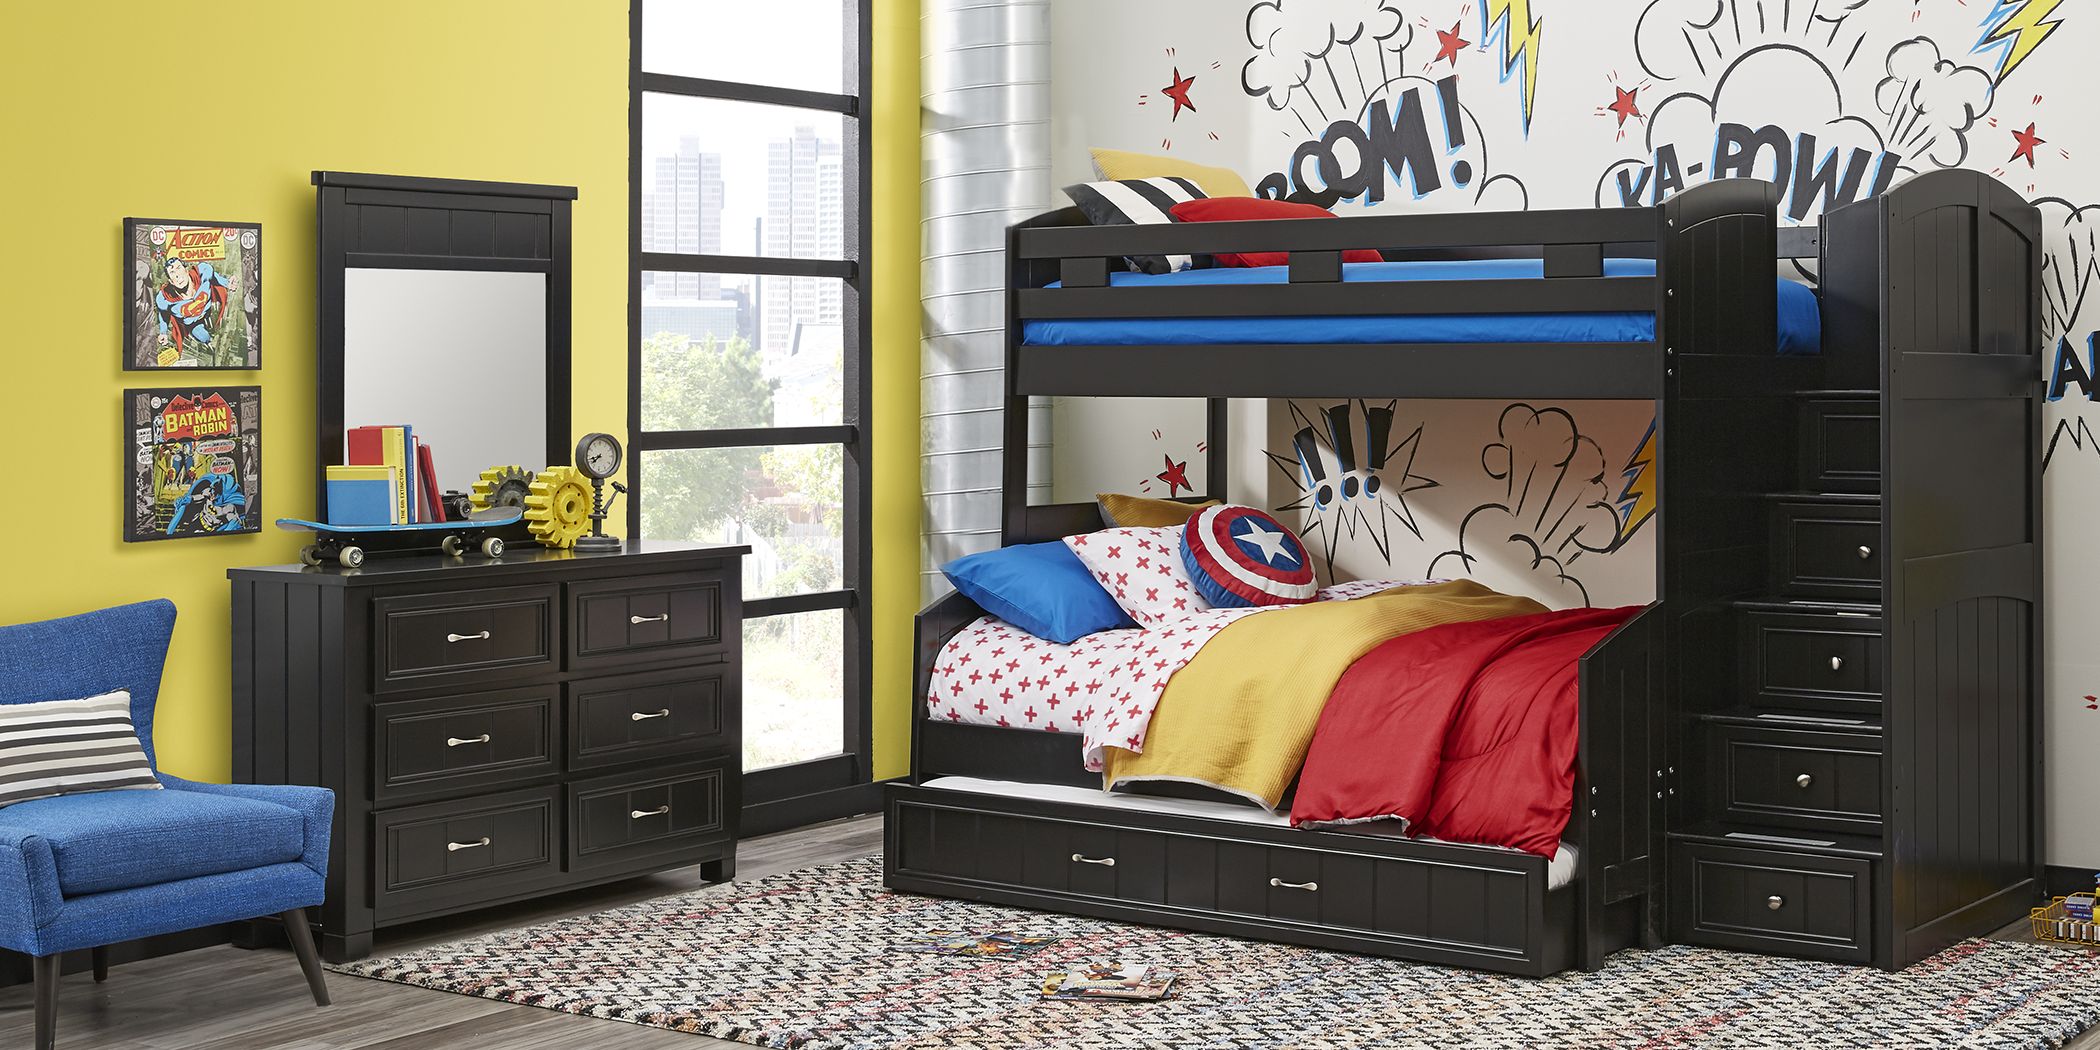 step bed for kids